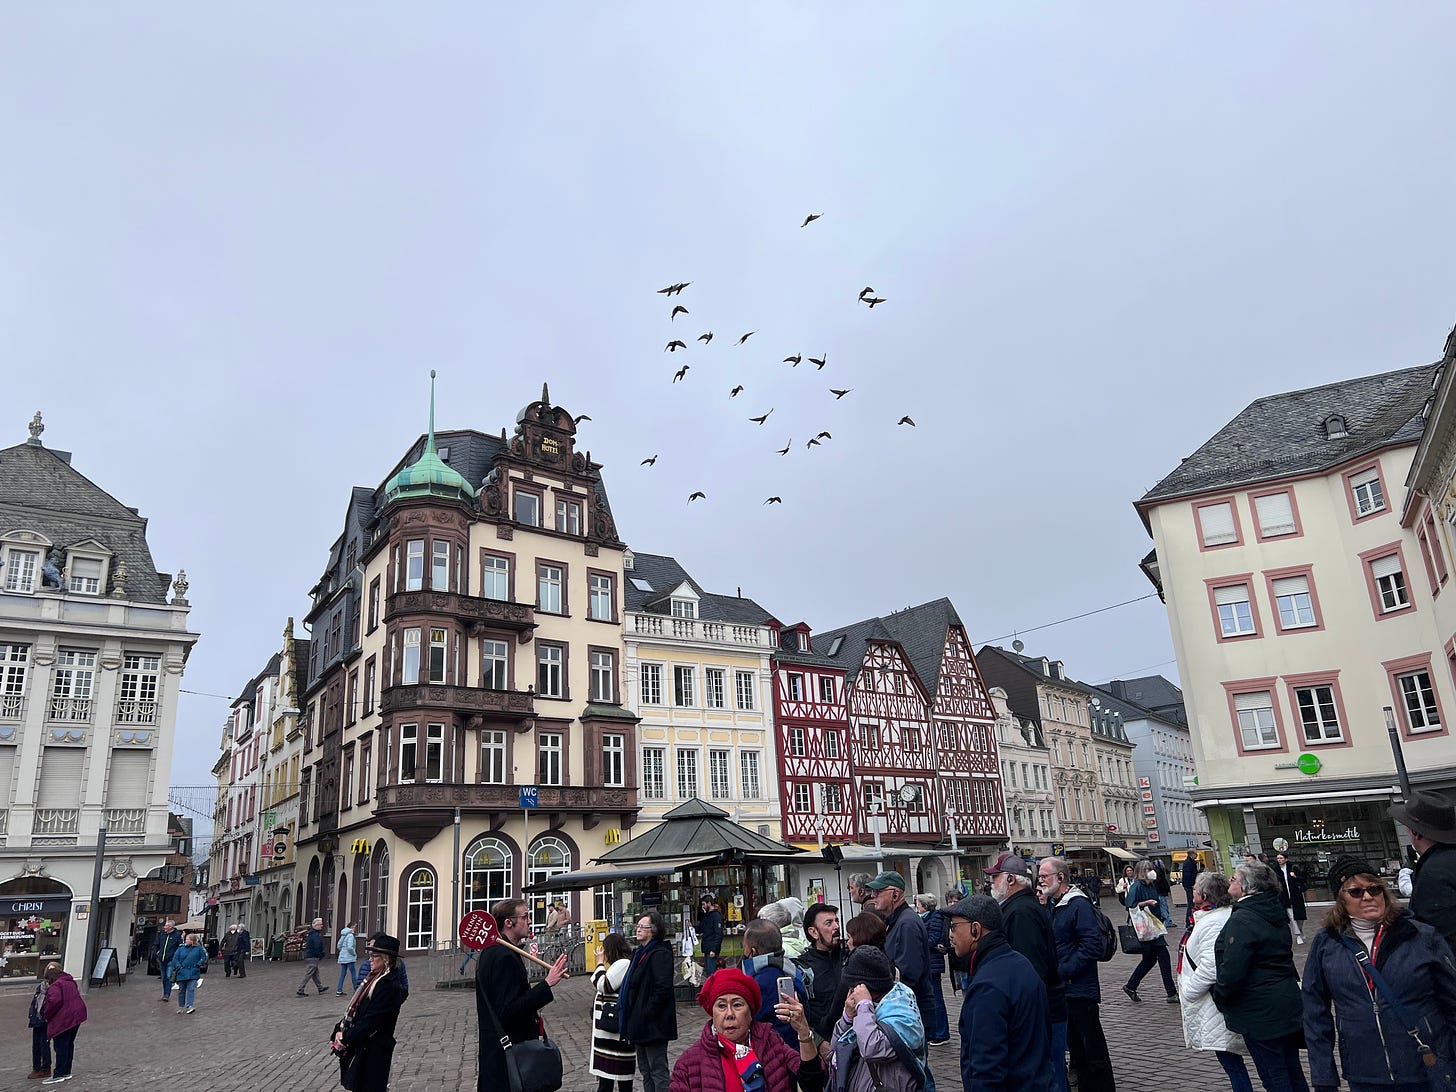 town square of trier, germany; several medieval buildings